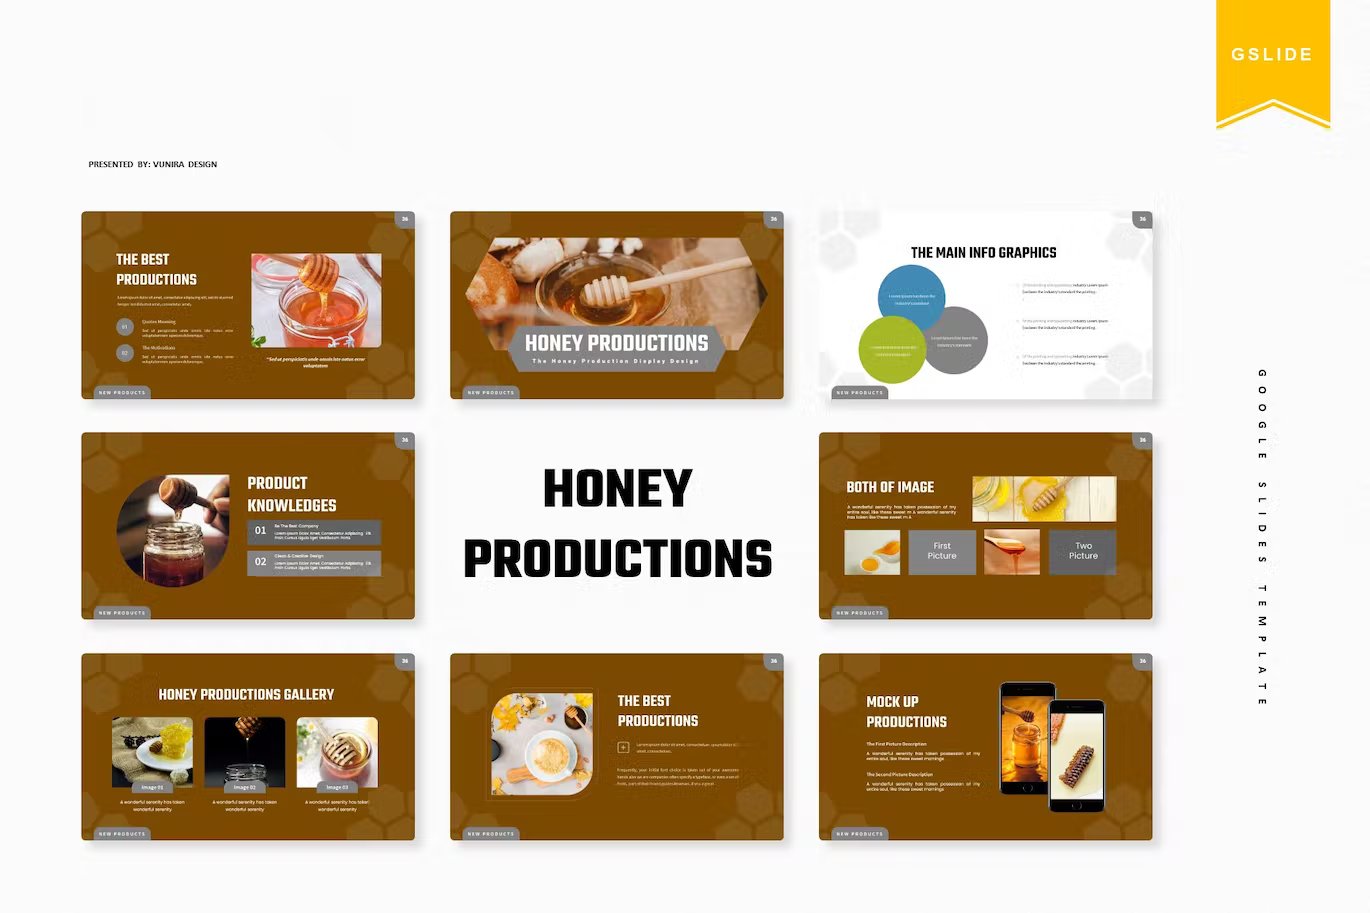 The topic of the presentation of honey.